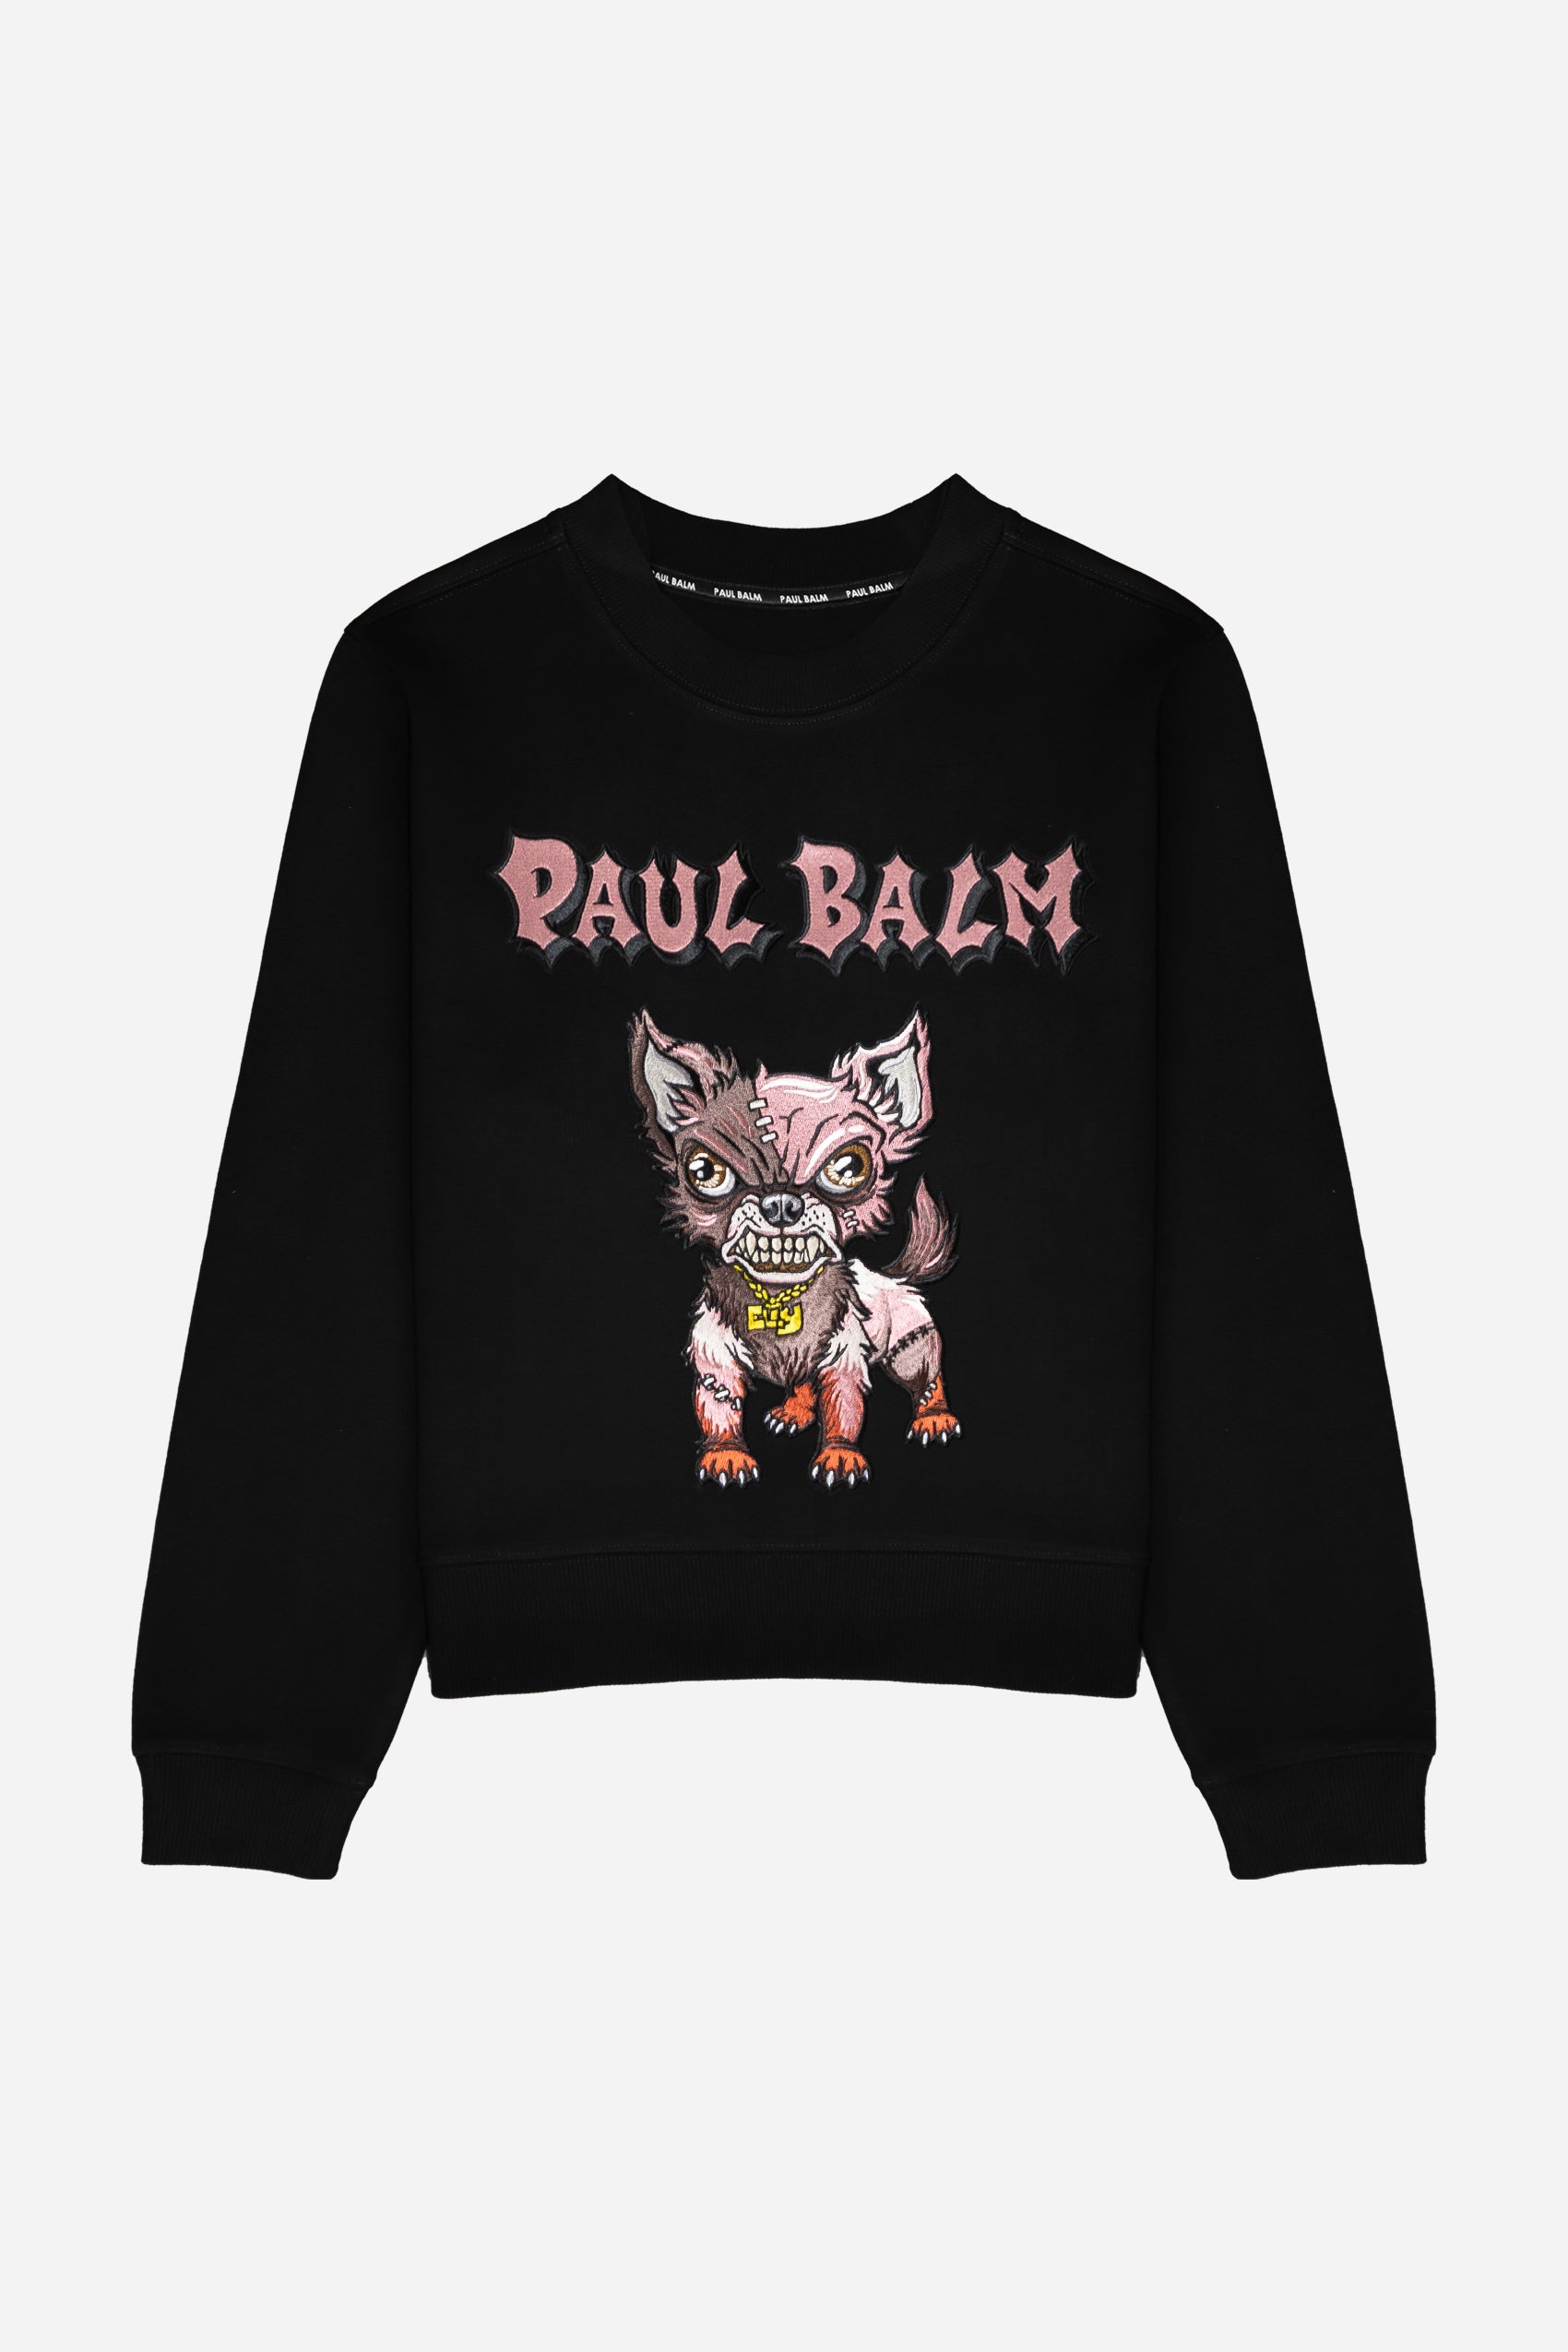 Embroidered Elly Sweatshirt - Limited to 300 - PAUL BALM WORLD